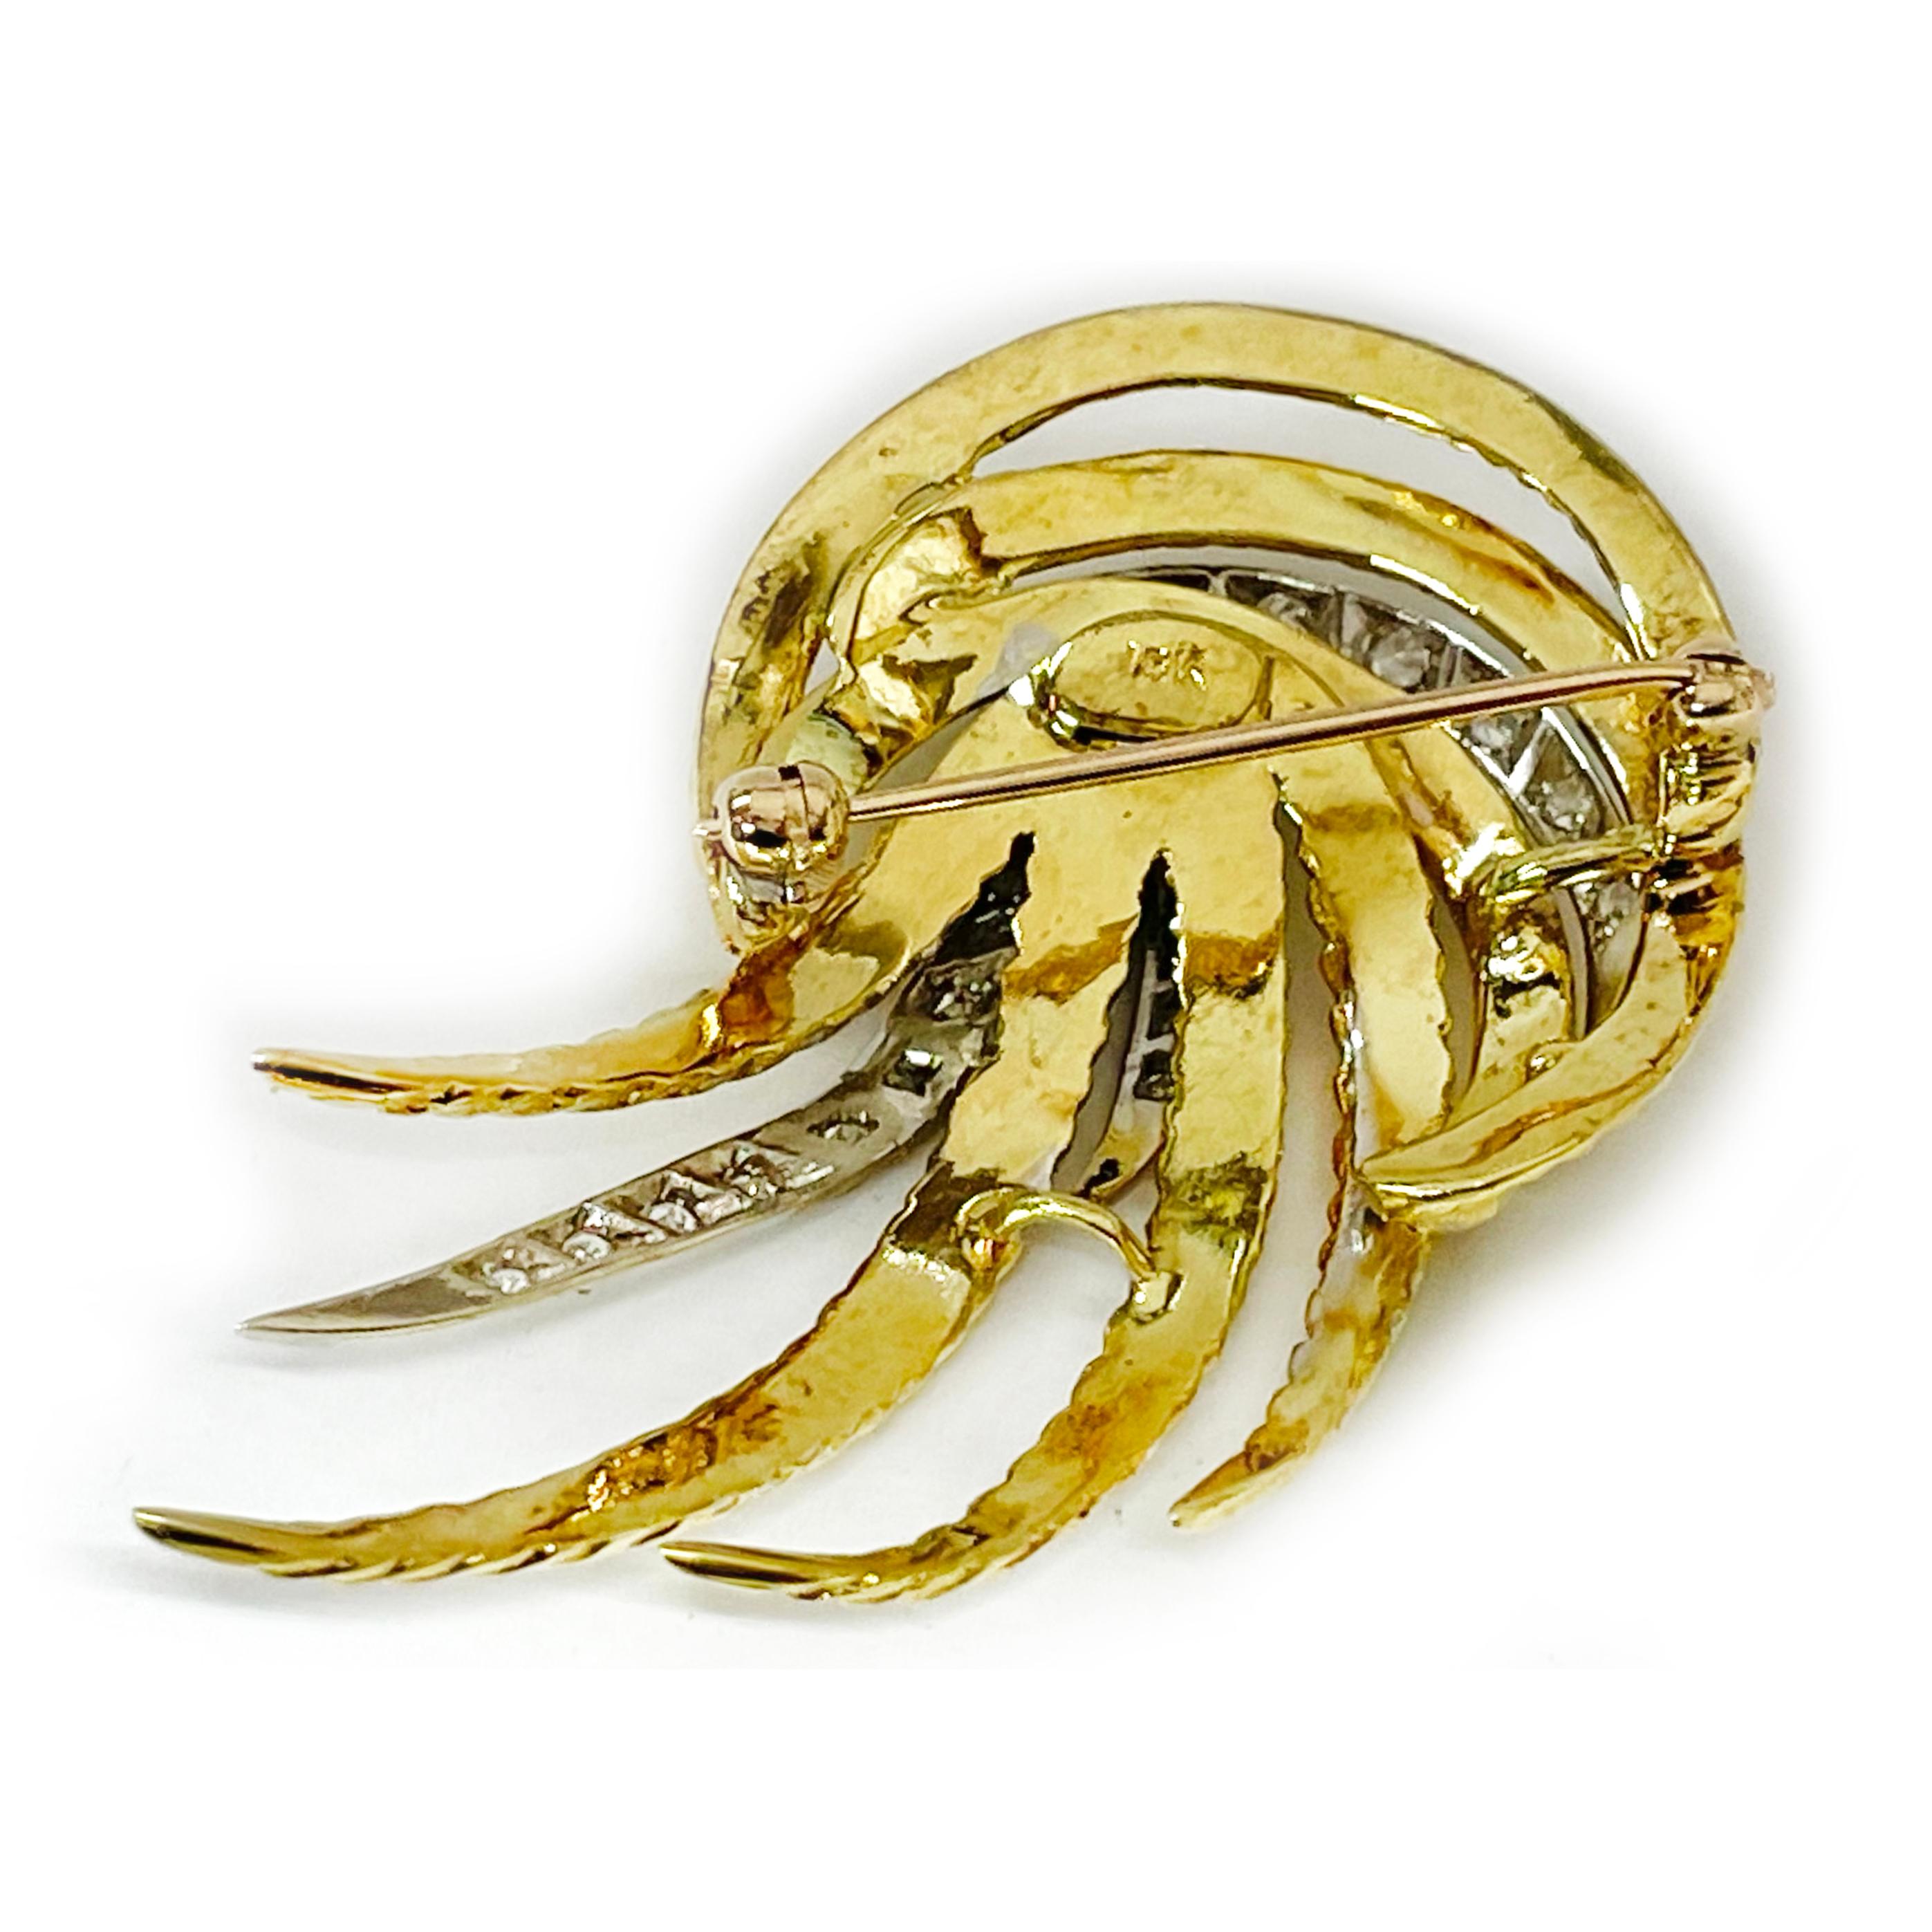 Round Cut Two Tone Gold Diamond Spray Brooch For Sale